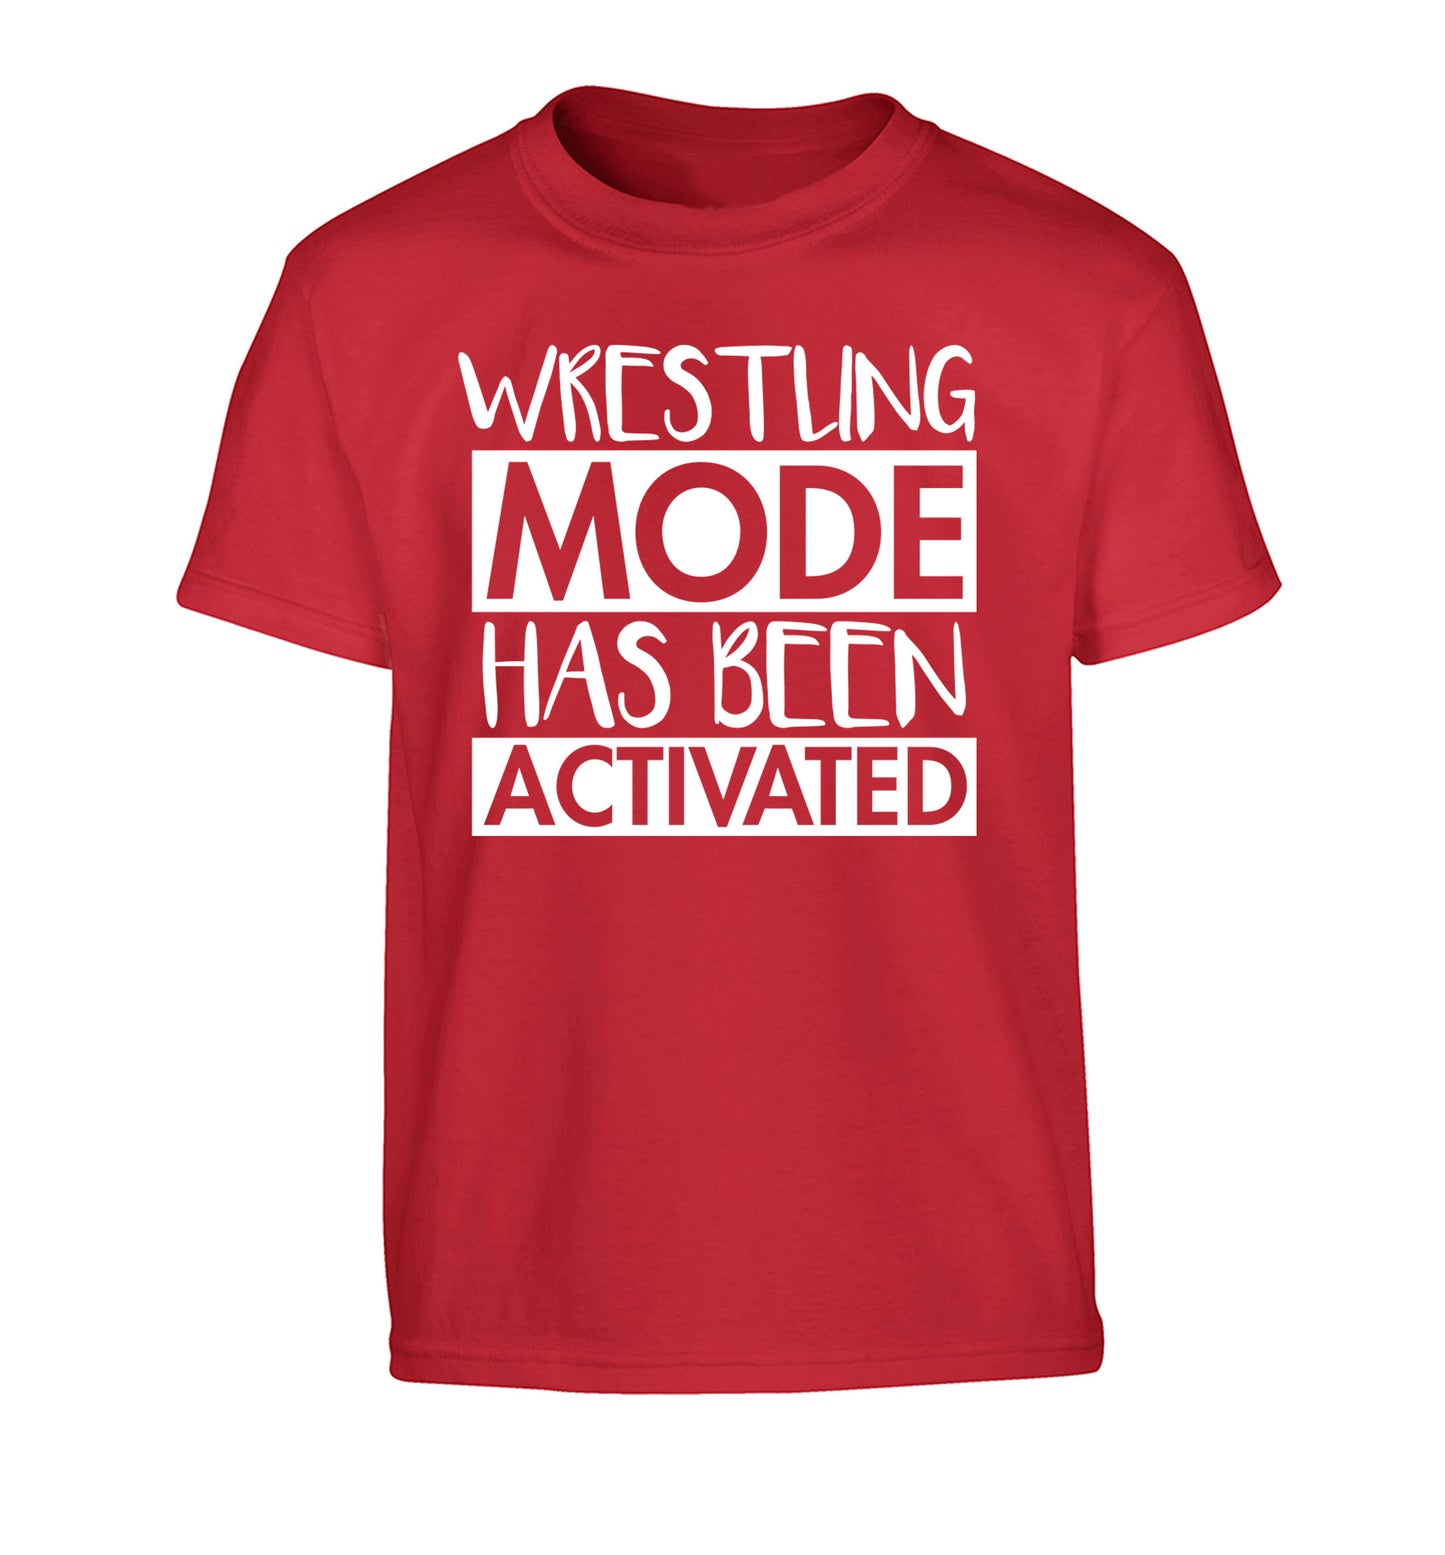 Wresting mode activated Children's red Tshirt 12-14 Years